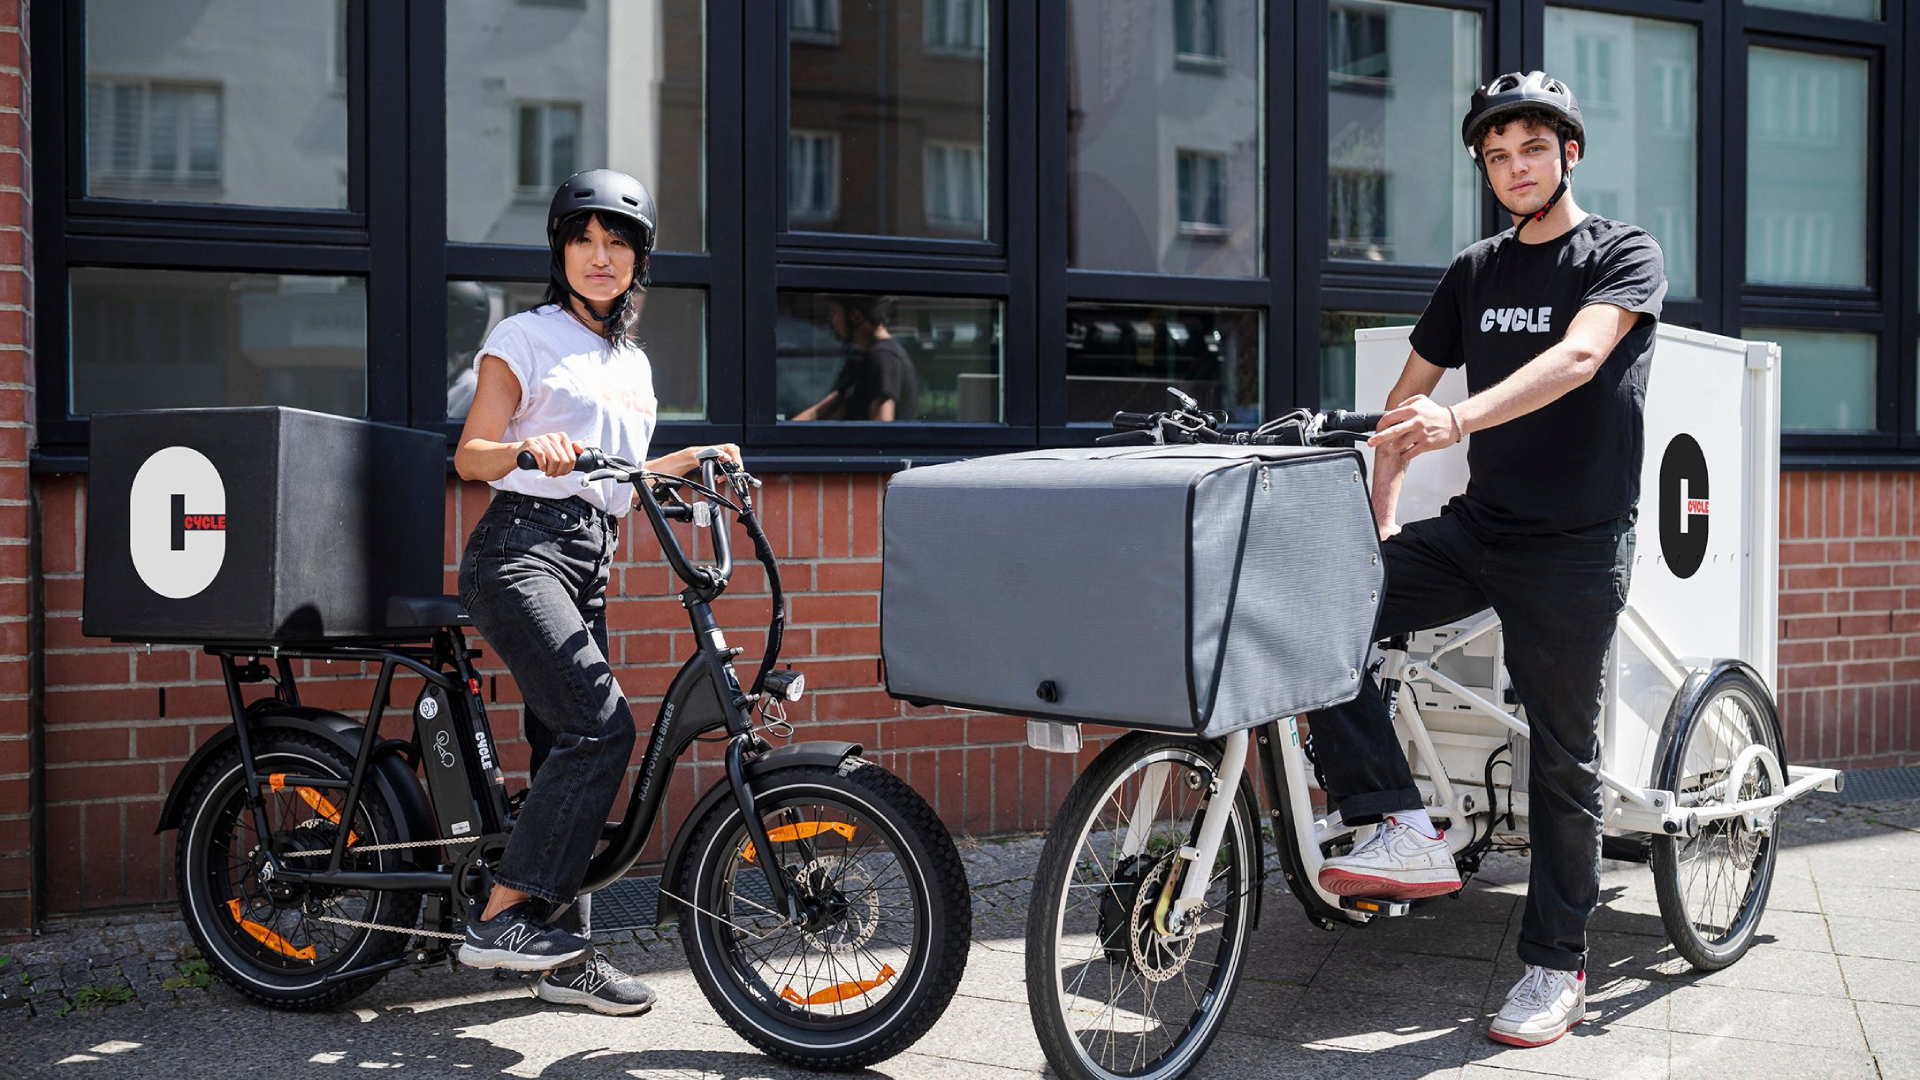 CYCLE Gains Recognition for Innovating in Last-Mile Delivery